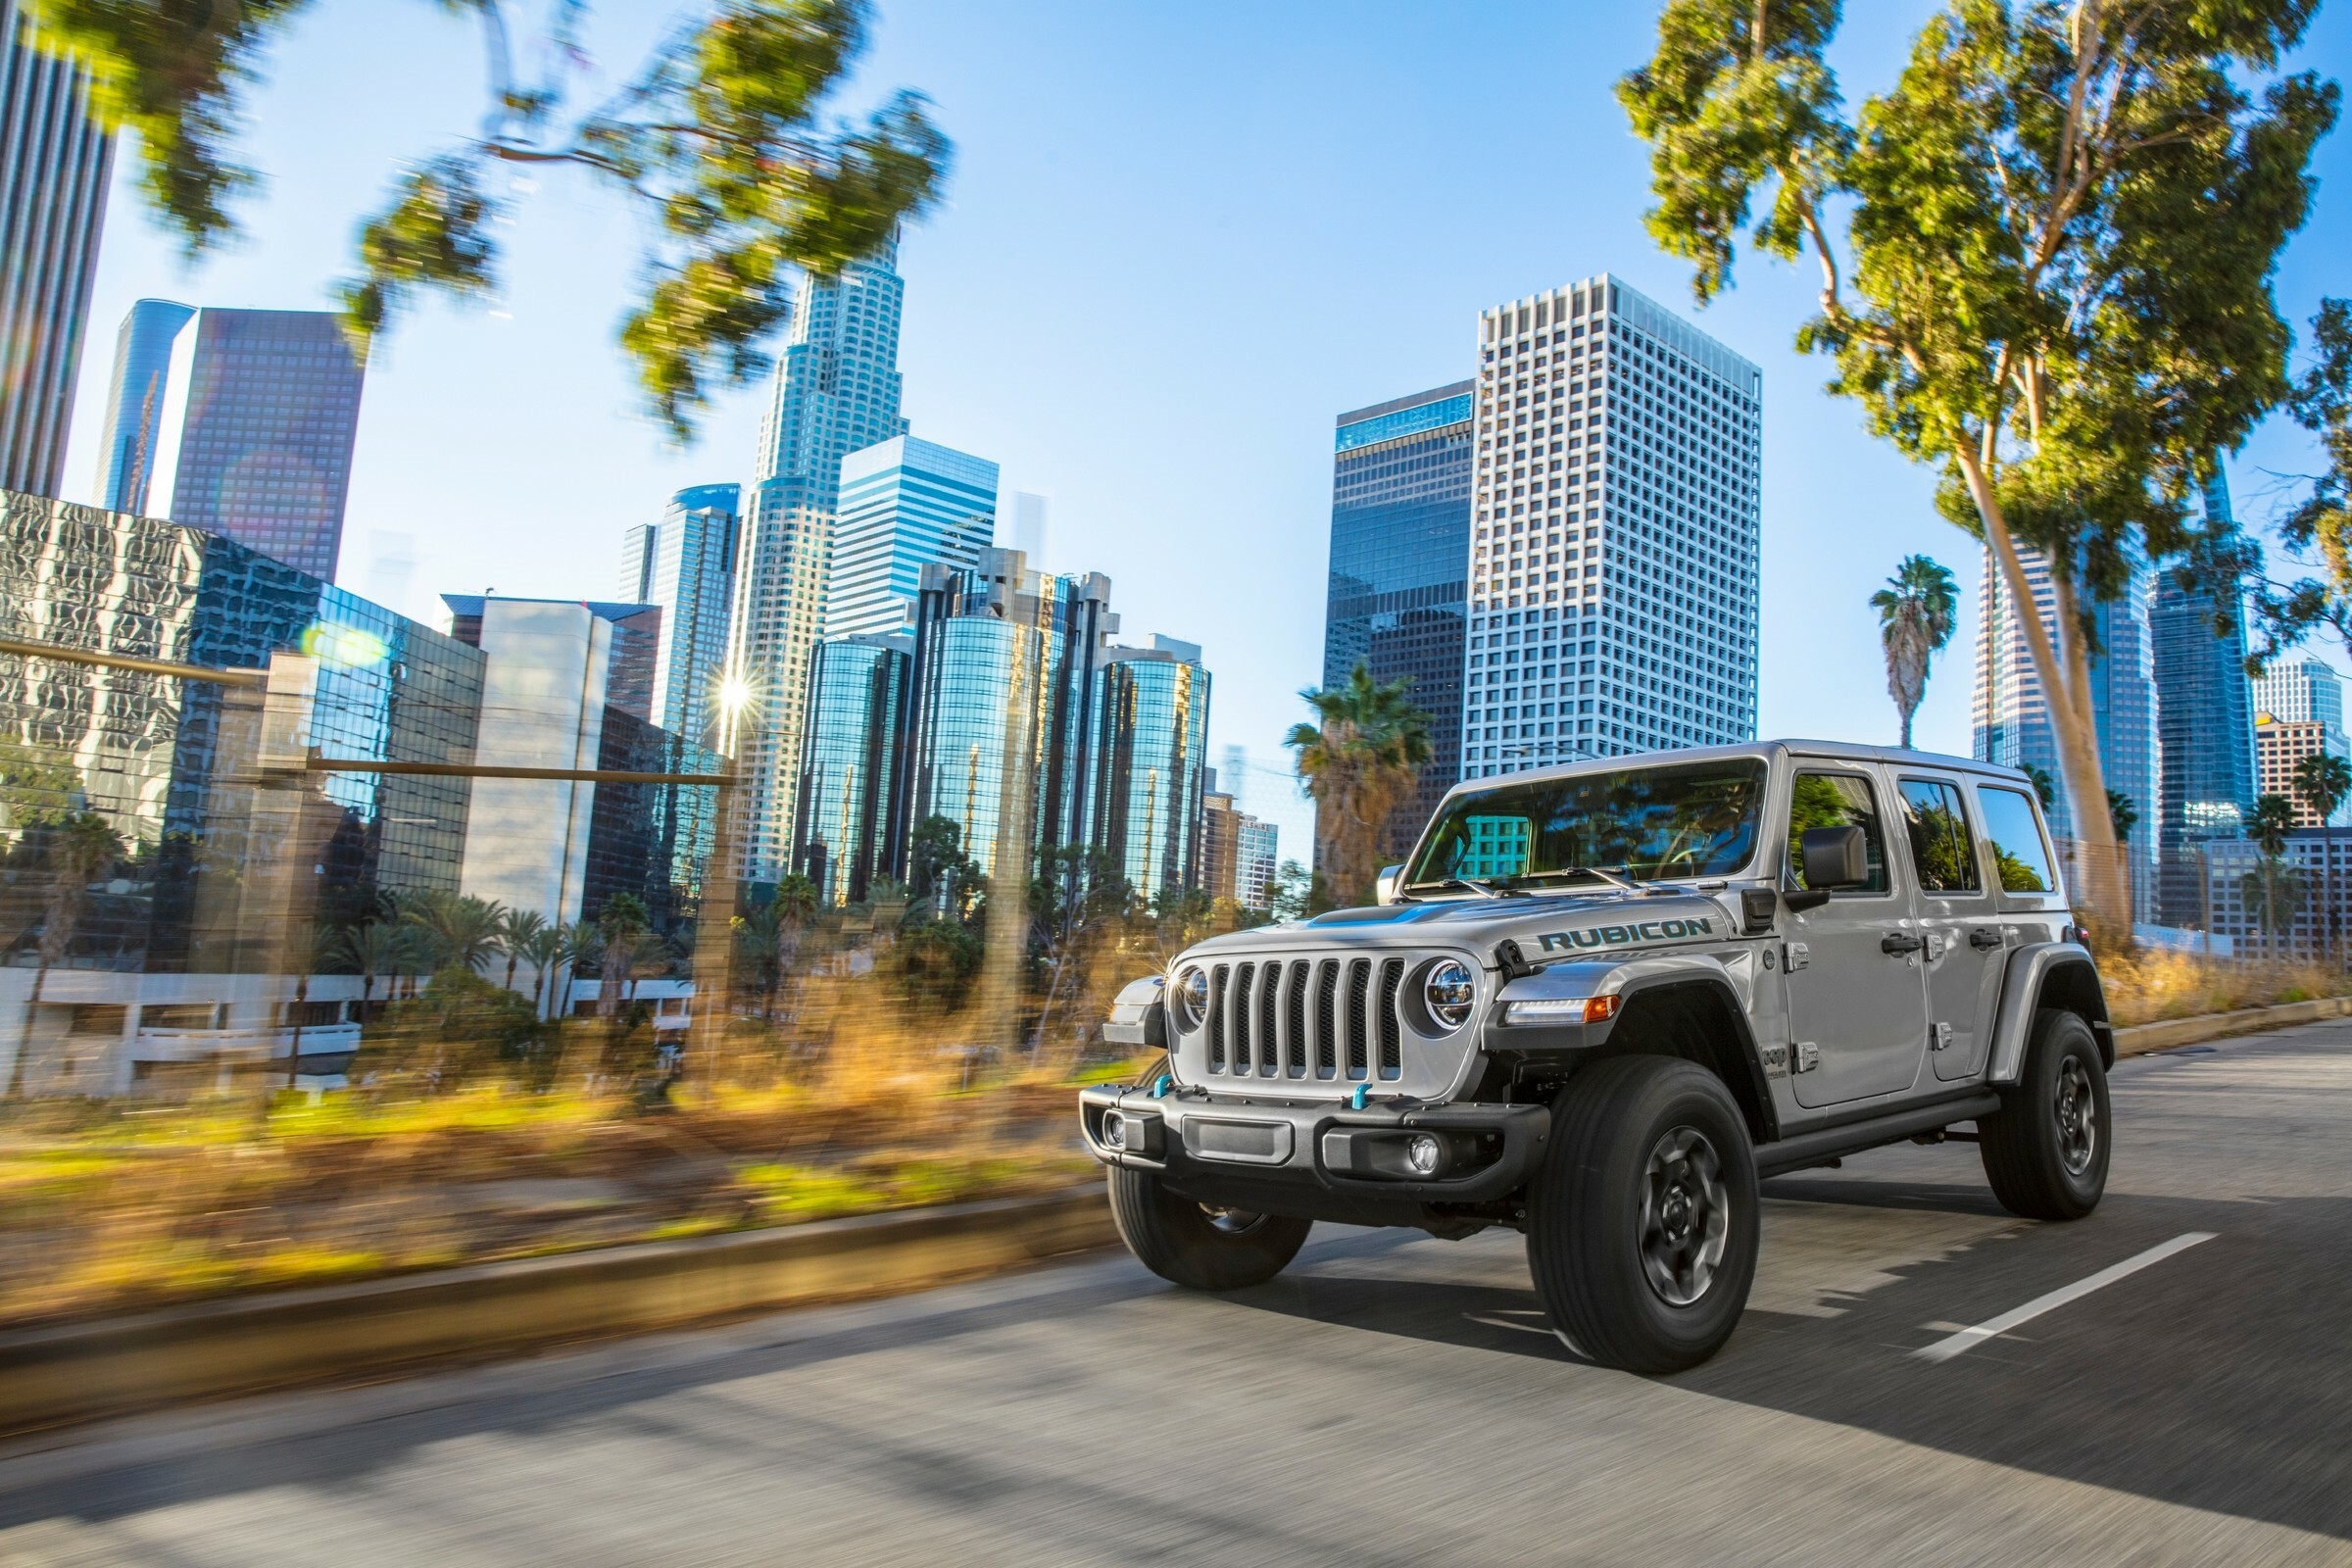 Jeep: The car has Dana 44 front and rear axles with electric differential locks, a transfer case with a 4.10 reduction gear ratio, as well as reinforced suspension dampers and switchable anti-roll bars, Rubicon. 2400x1600 HD Background.